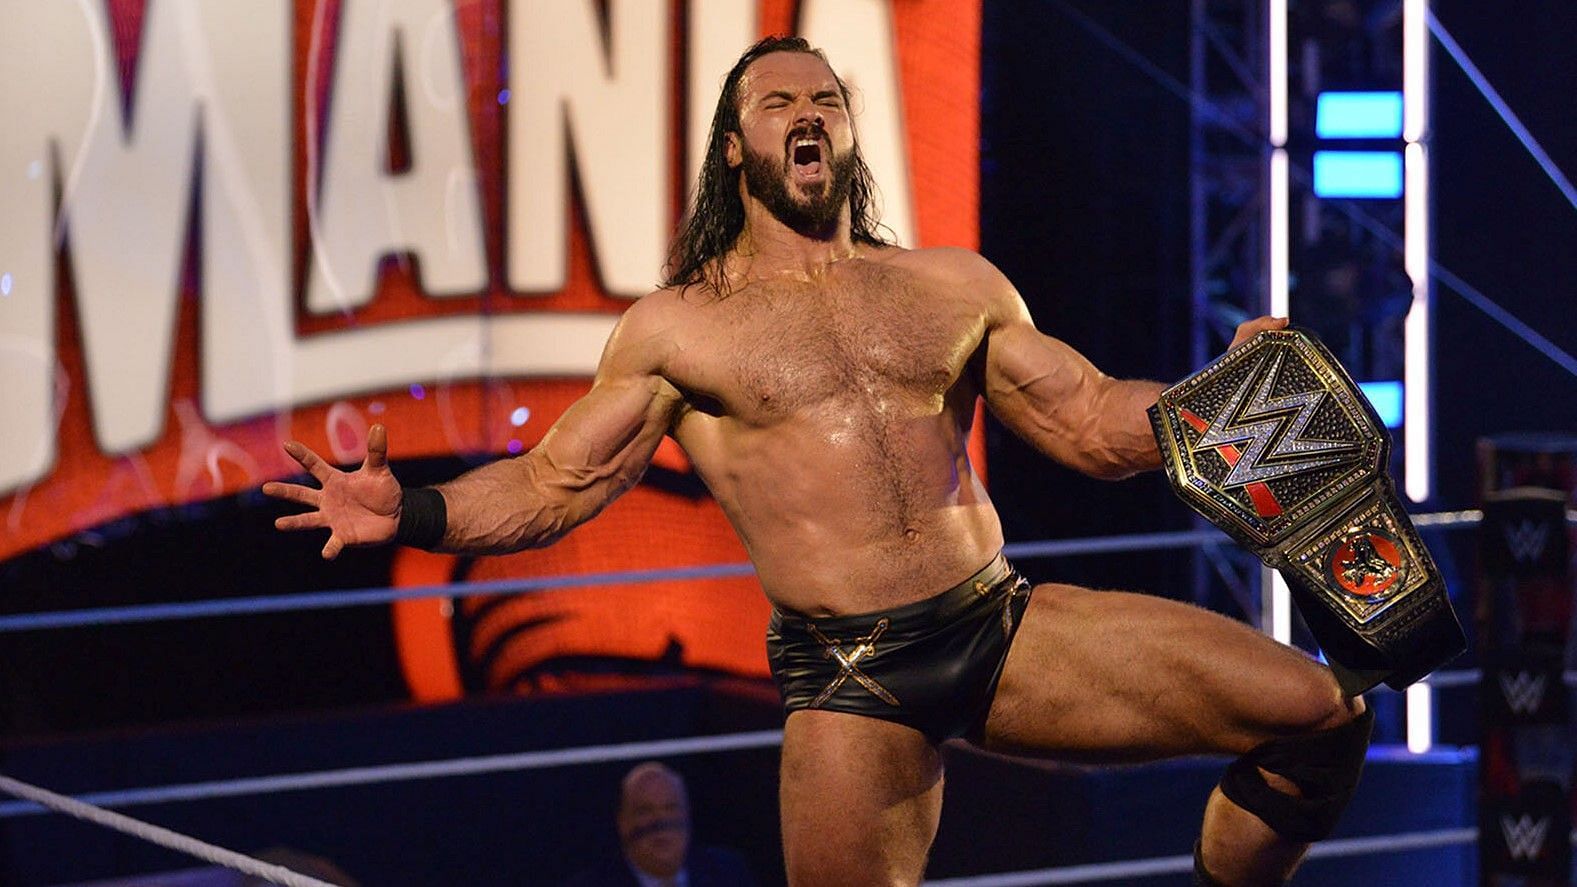 Drew McIntyre wants his WrestleMania moment in front of fans